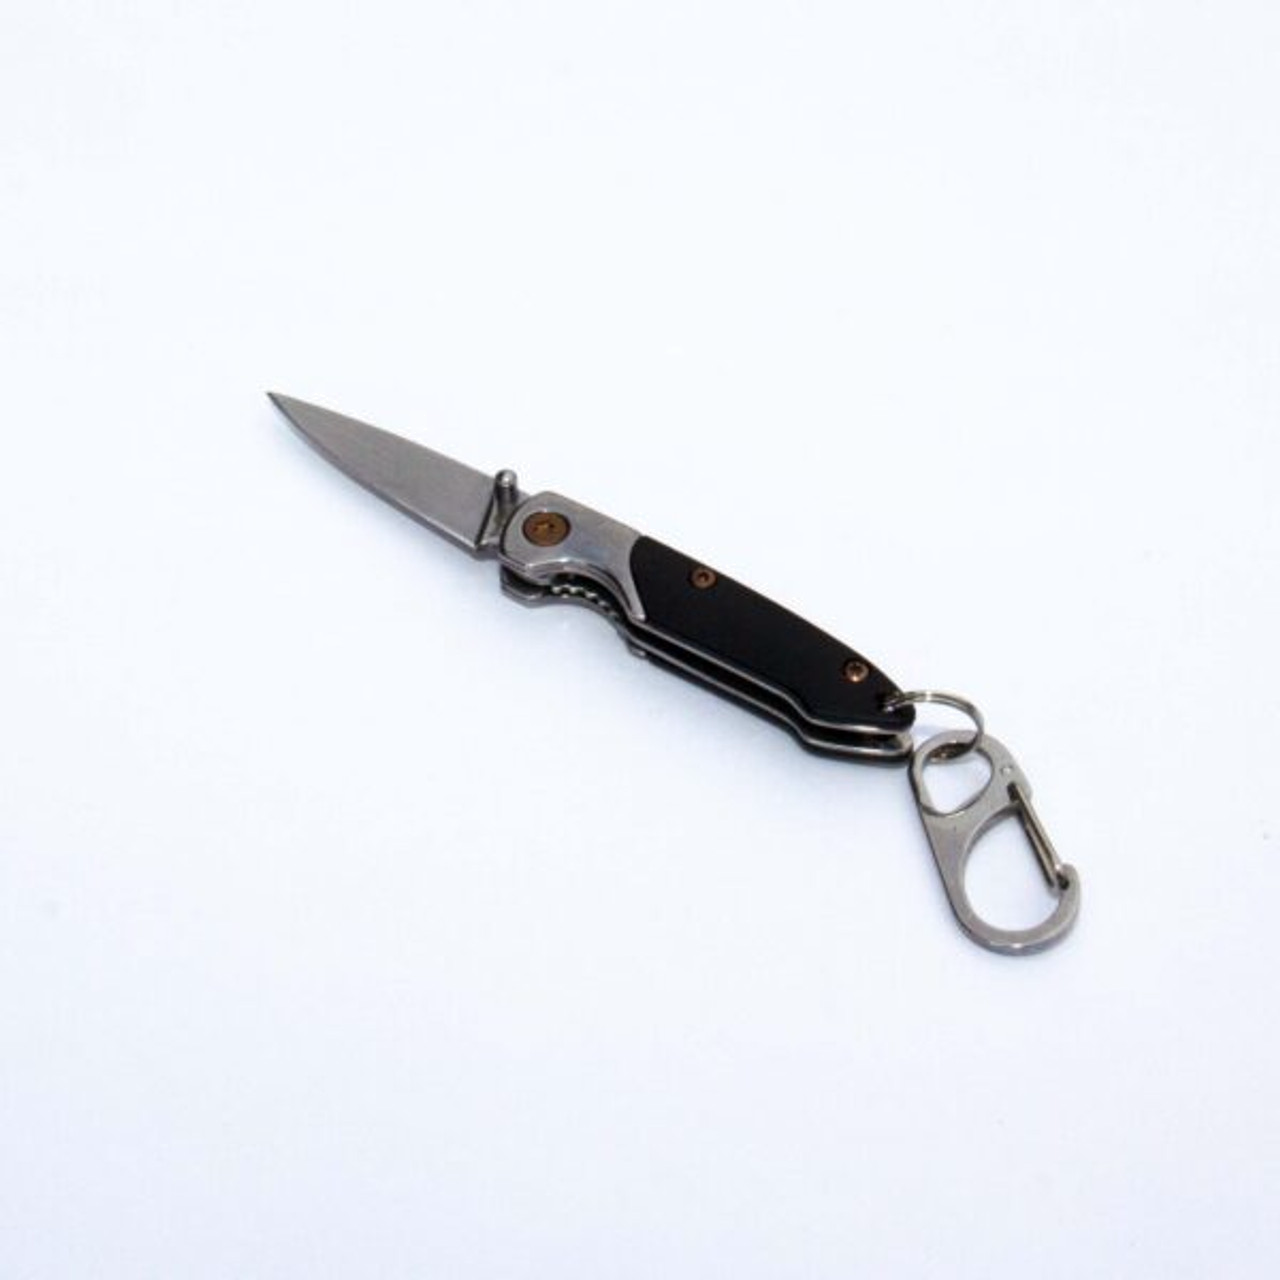 product image for Brighten Blades Black BB 131 Keychain Knife